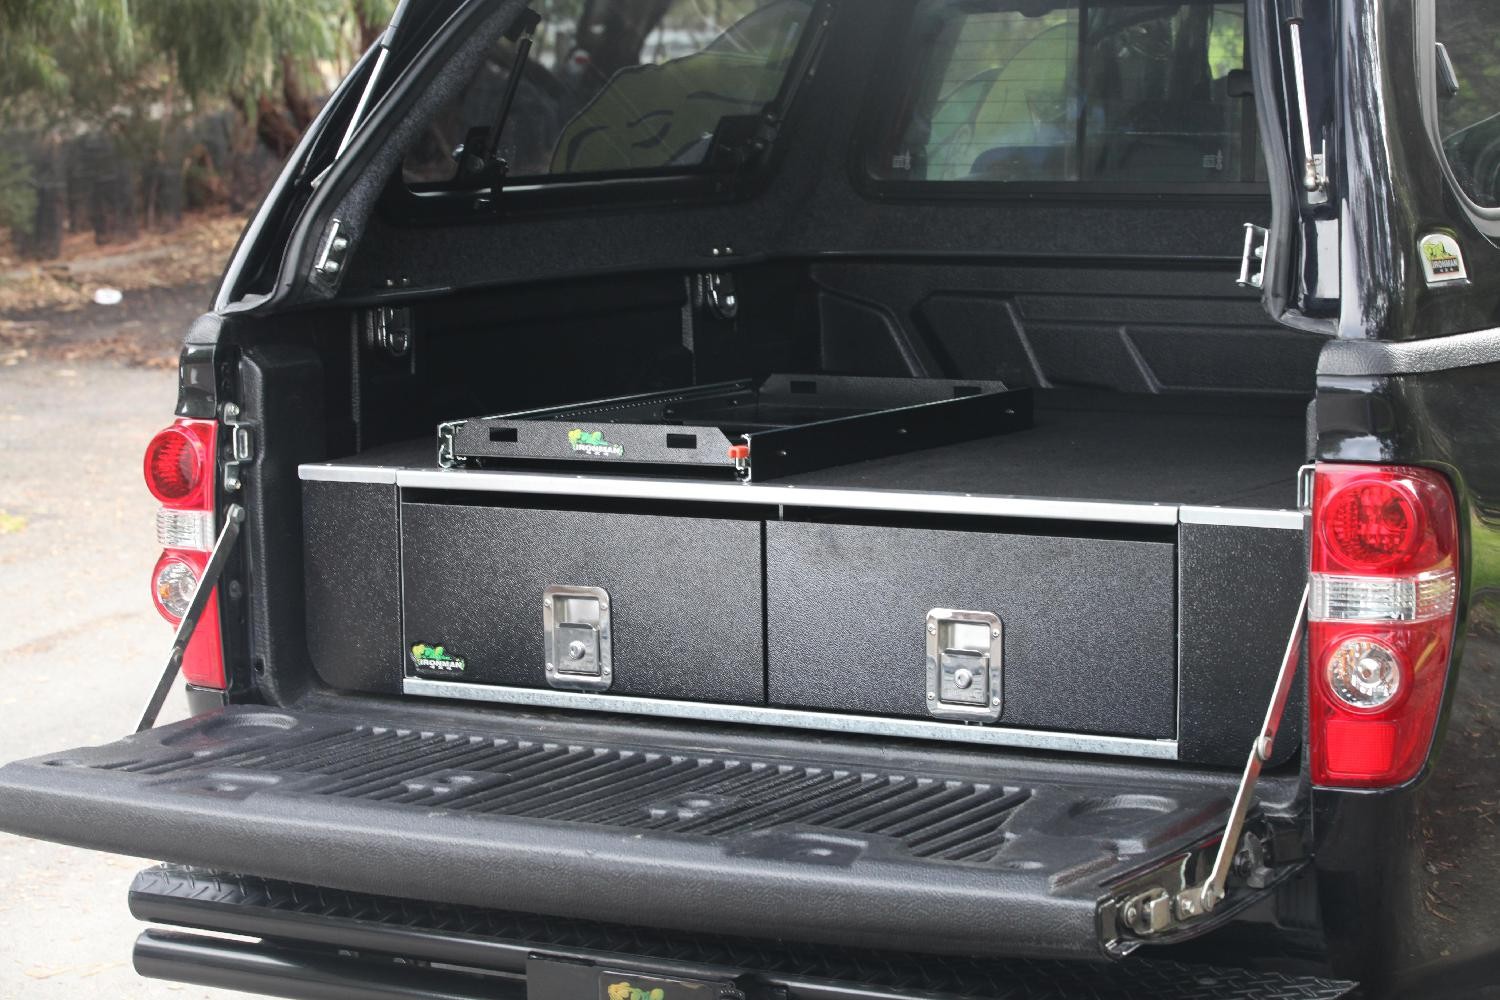 DRAWER WING KIT TO SUIT TOYOTA HILUX REVO 2015+